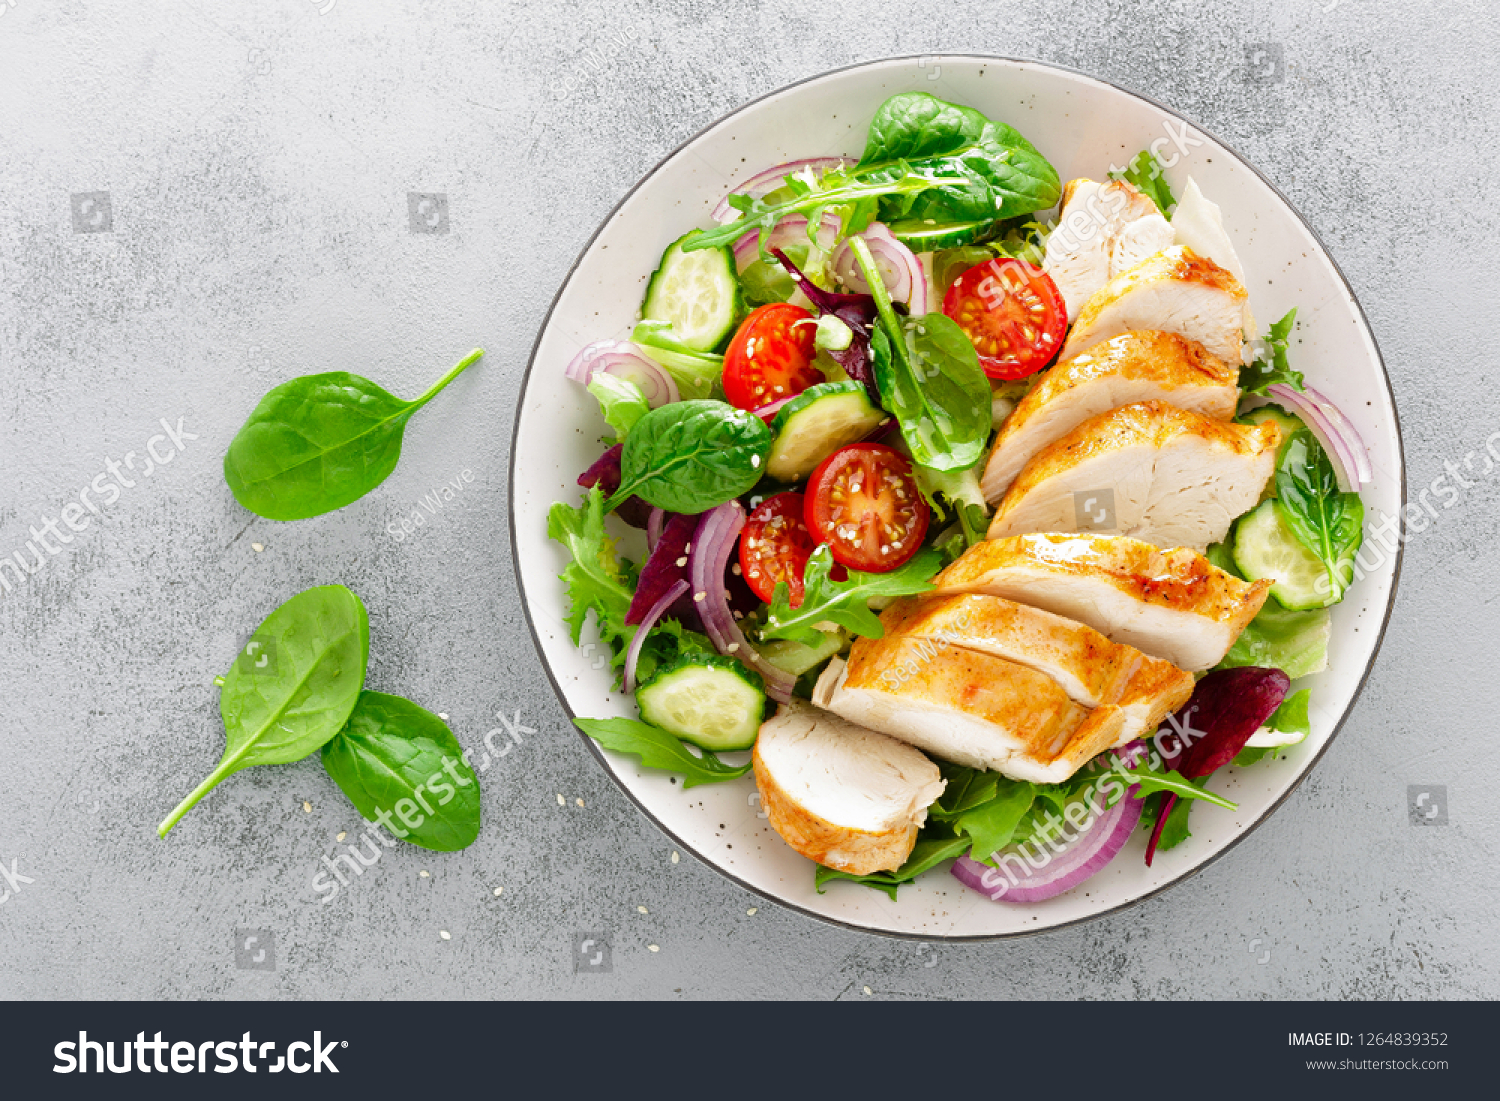 Grilled chicken breast, fillet and fresh vegetable salad of lettuce, arugula, spinach, cucumber and tomato. Healthy lunch menu. Diet food. Top view #1264839352